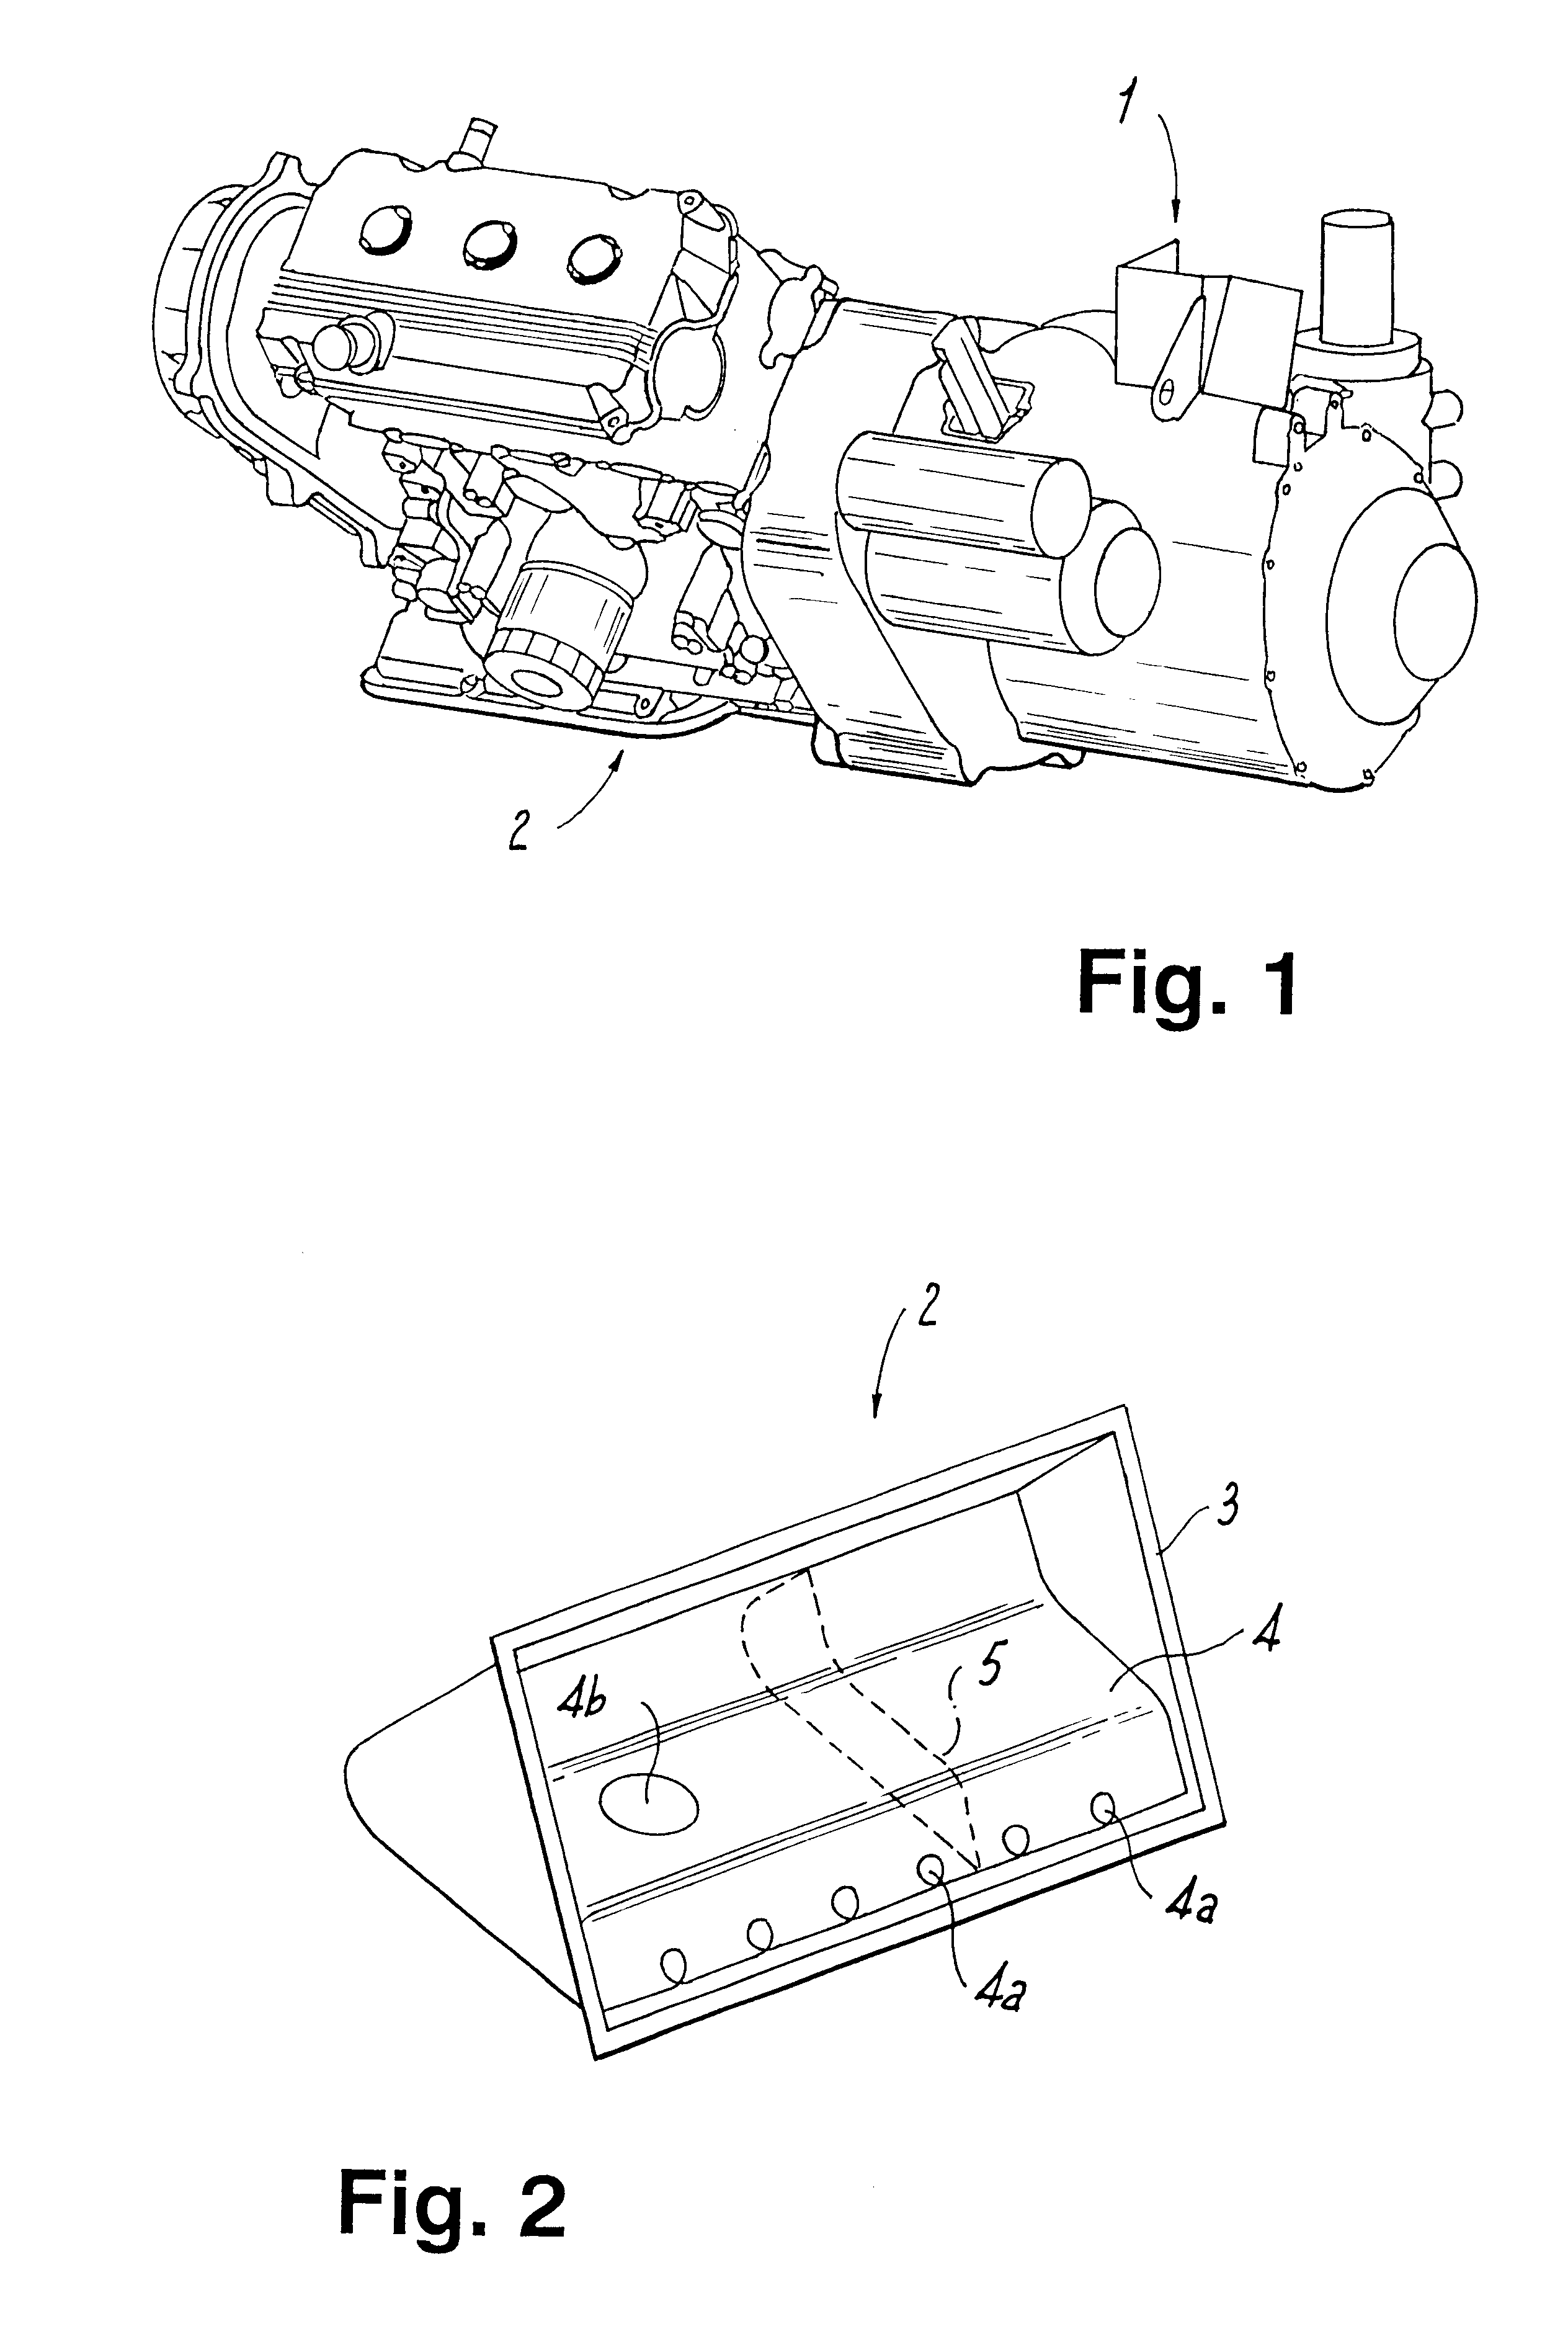 Oil pan structure for internal combustion engine